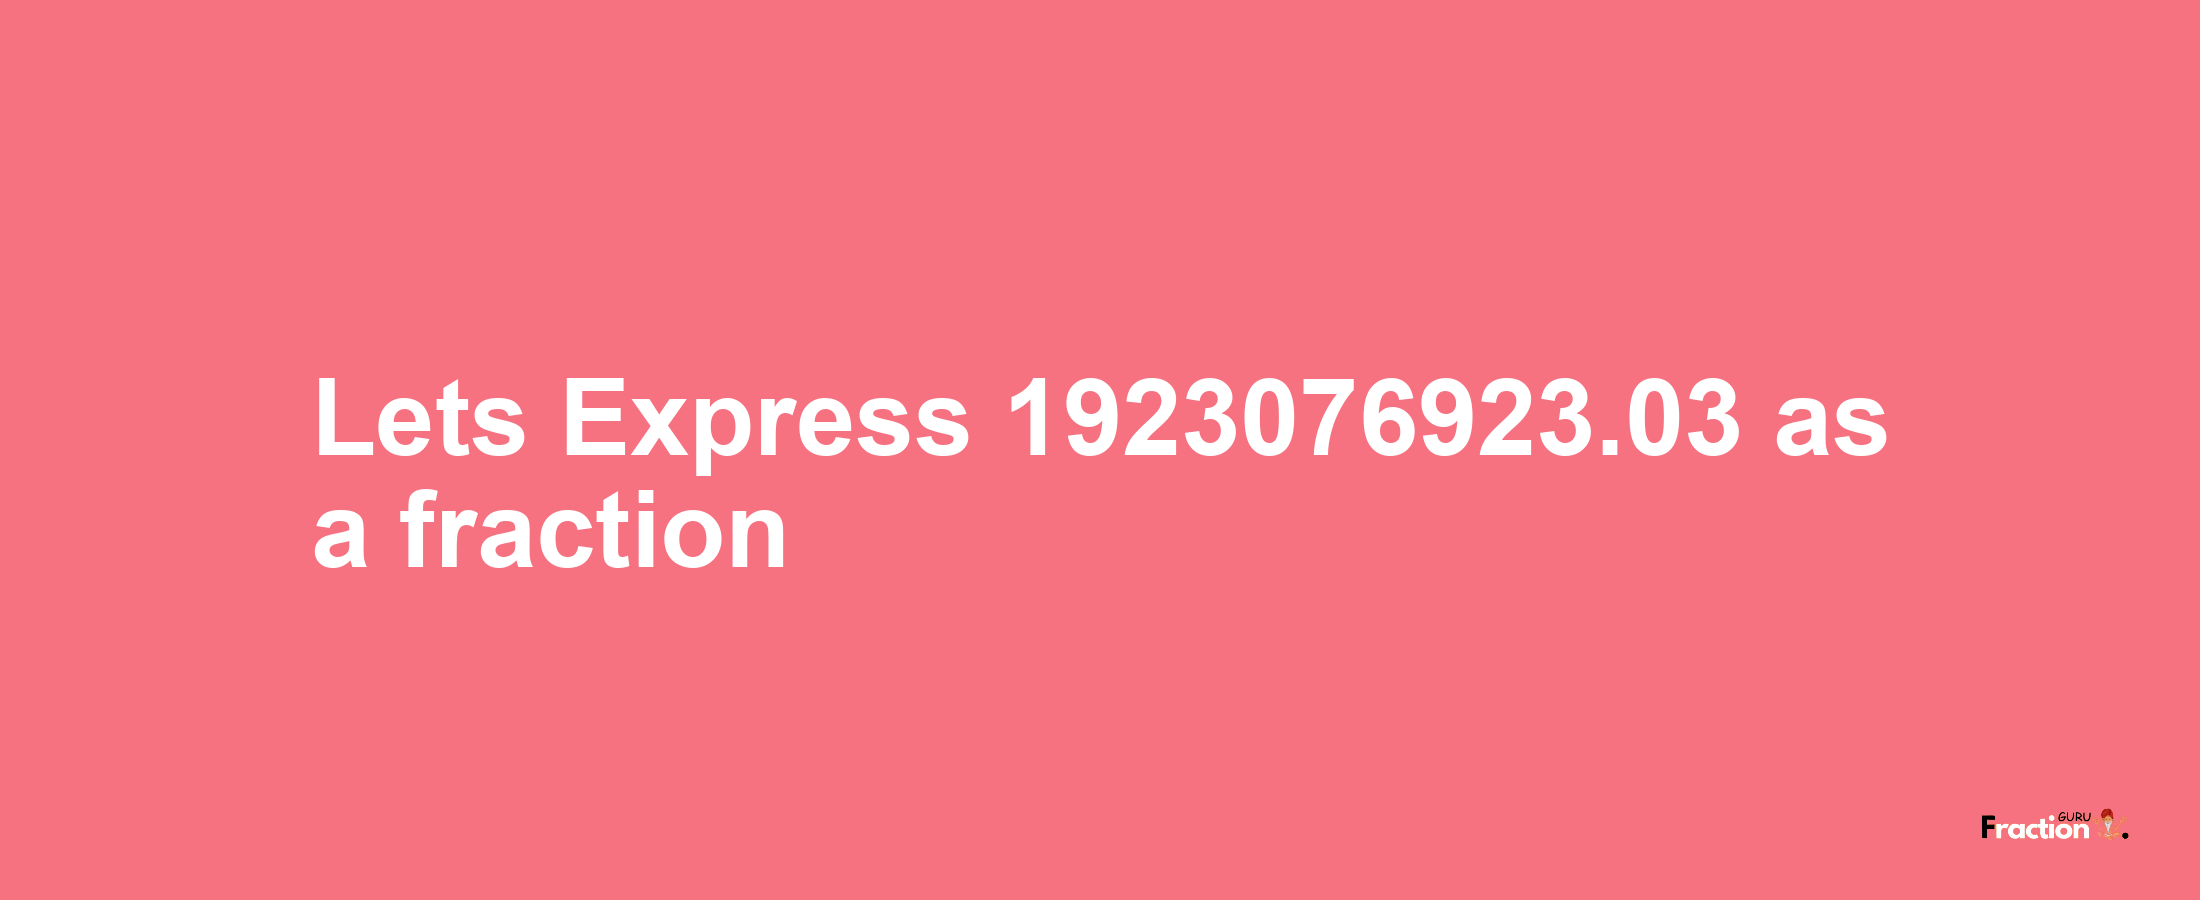 Lets Express 1923076923.03 as afraction